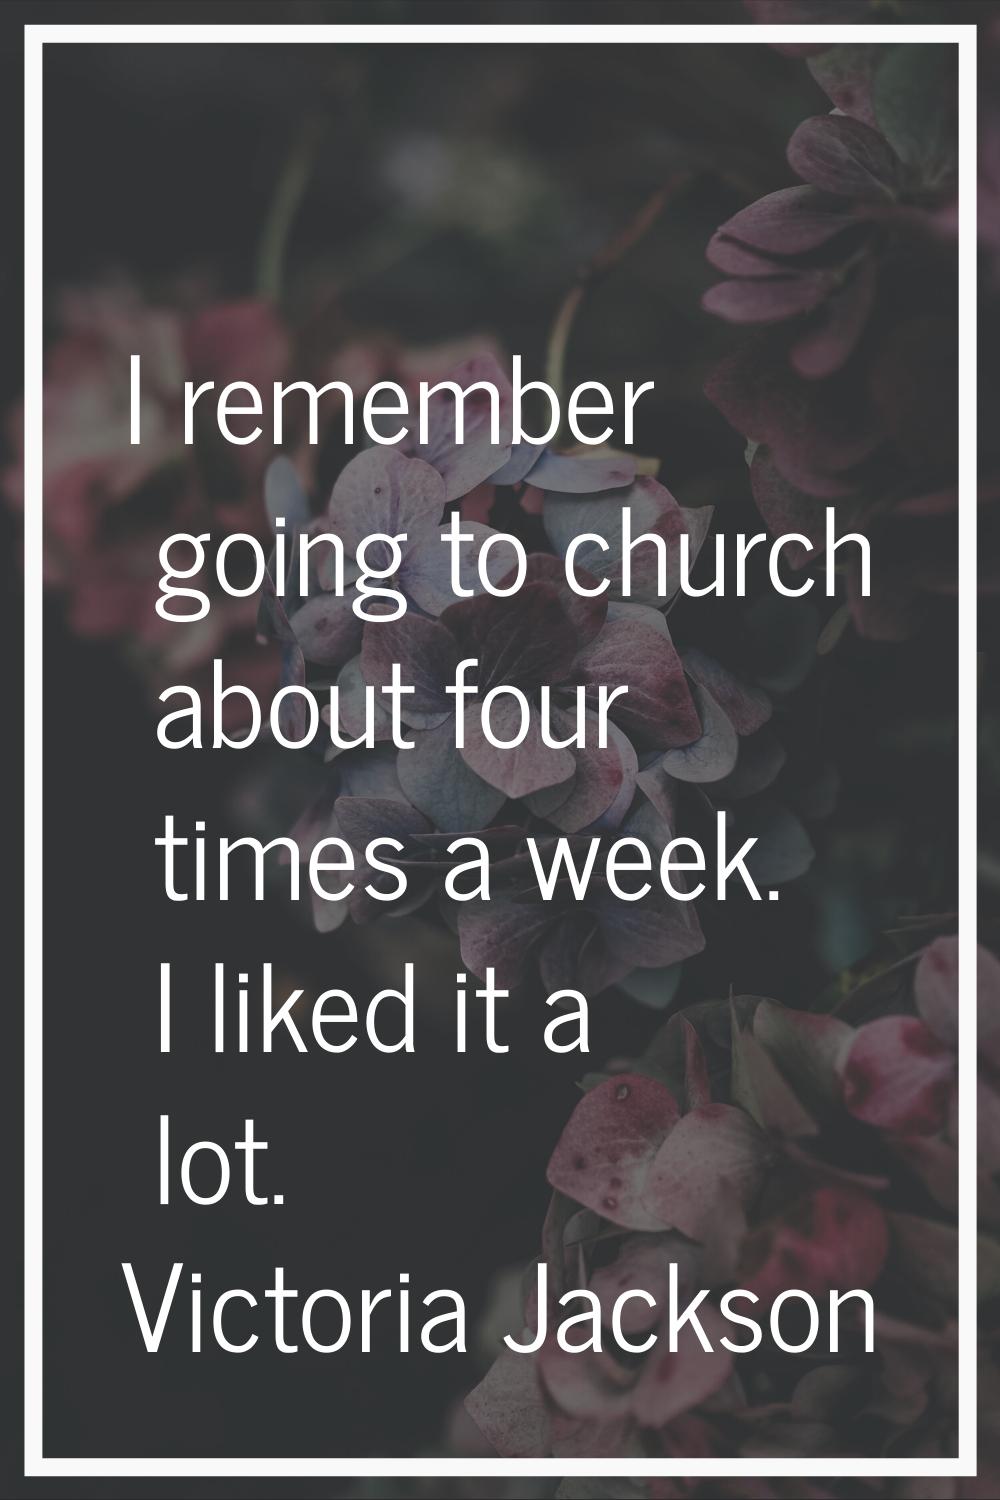 I remember going to church about four times a week. I liked it a lot.